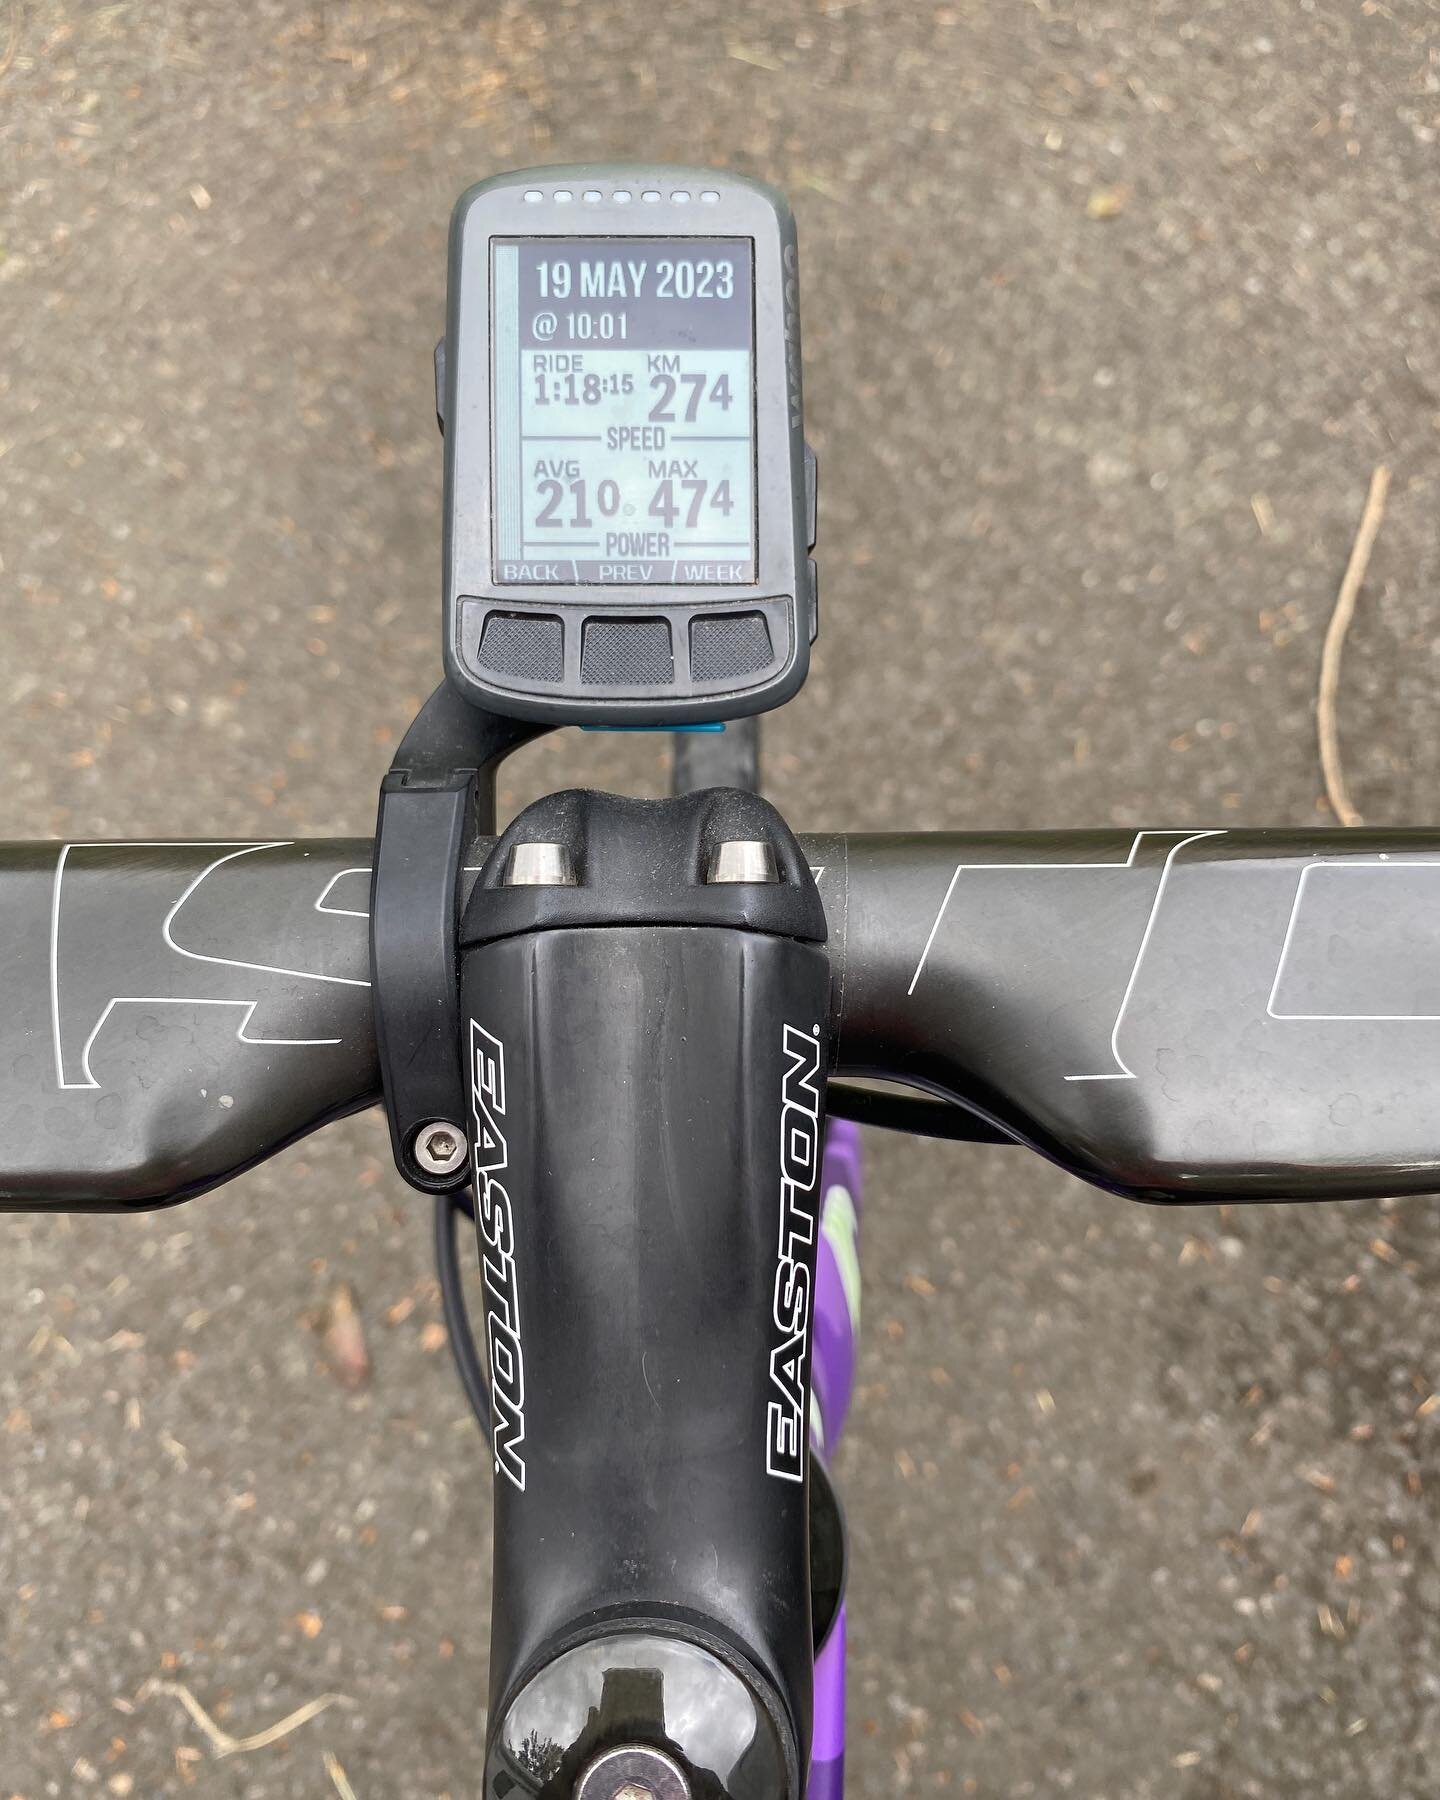 Back on the bike after best part of a year&hellip;. Ouchey!!! 🥵 during which I managed to acquire a whole 8 kgs weight 😥